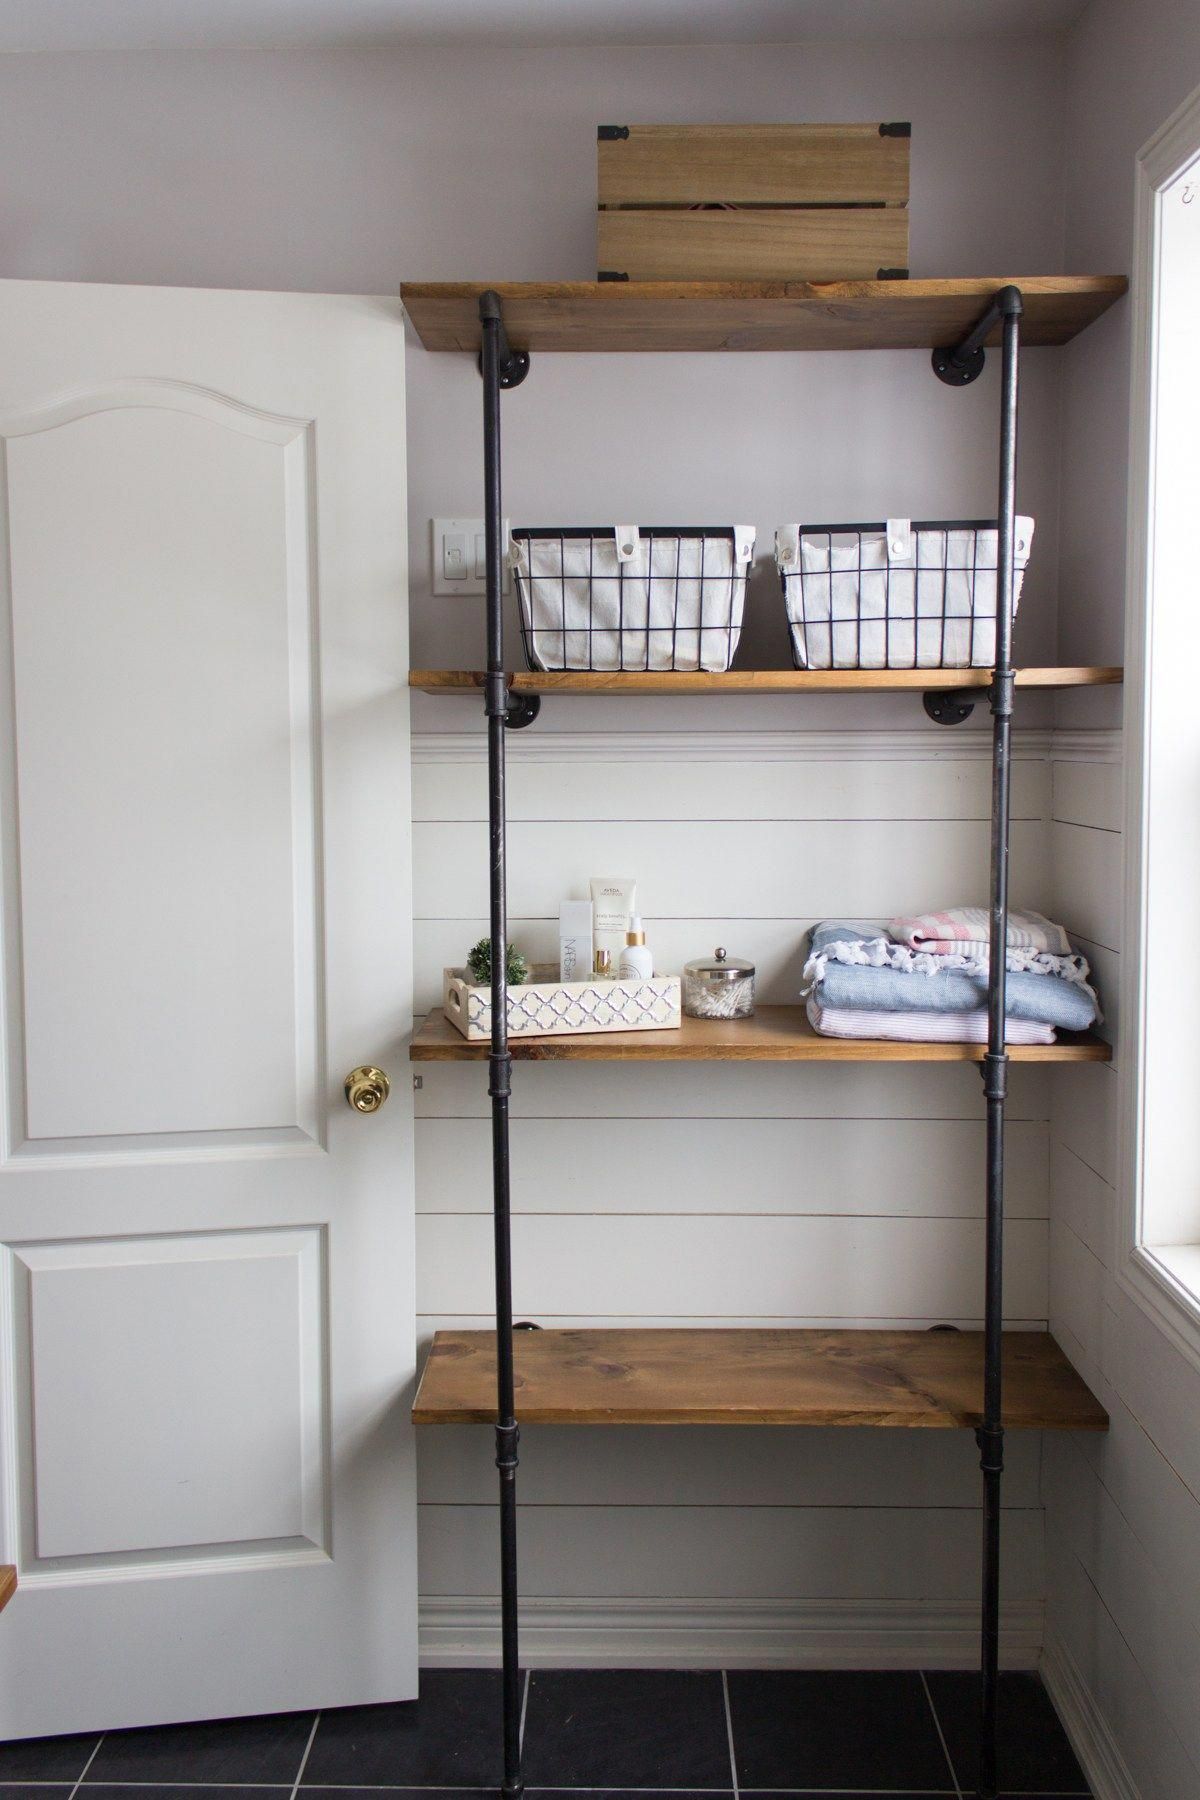 Build to Organize Challenge - DIY Pipe Shelves for the Bathroom | House by the Bay Design - Build to Organize Challenge - DIY Pipe Shelves for the Bathroom | House by the Bay Design -   18 diy Shelves rental ideas